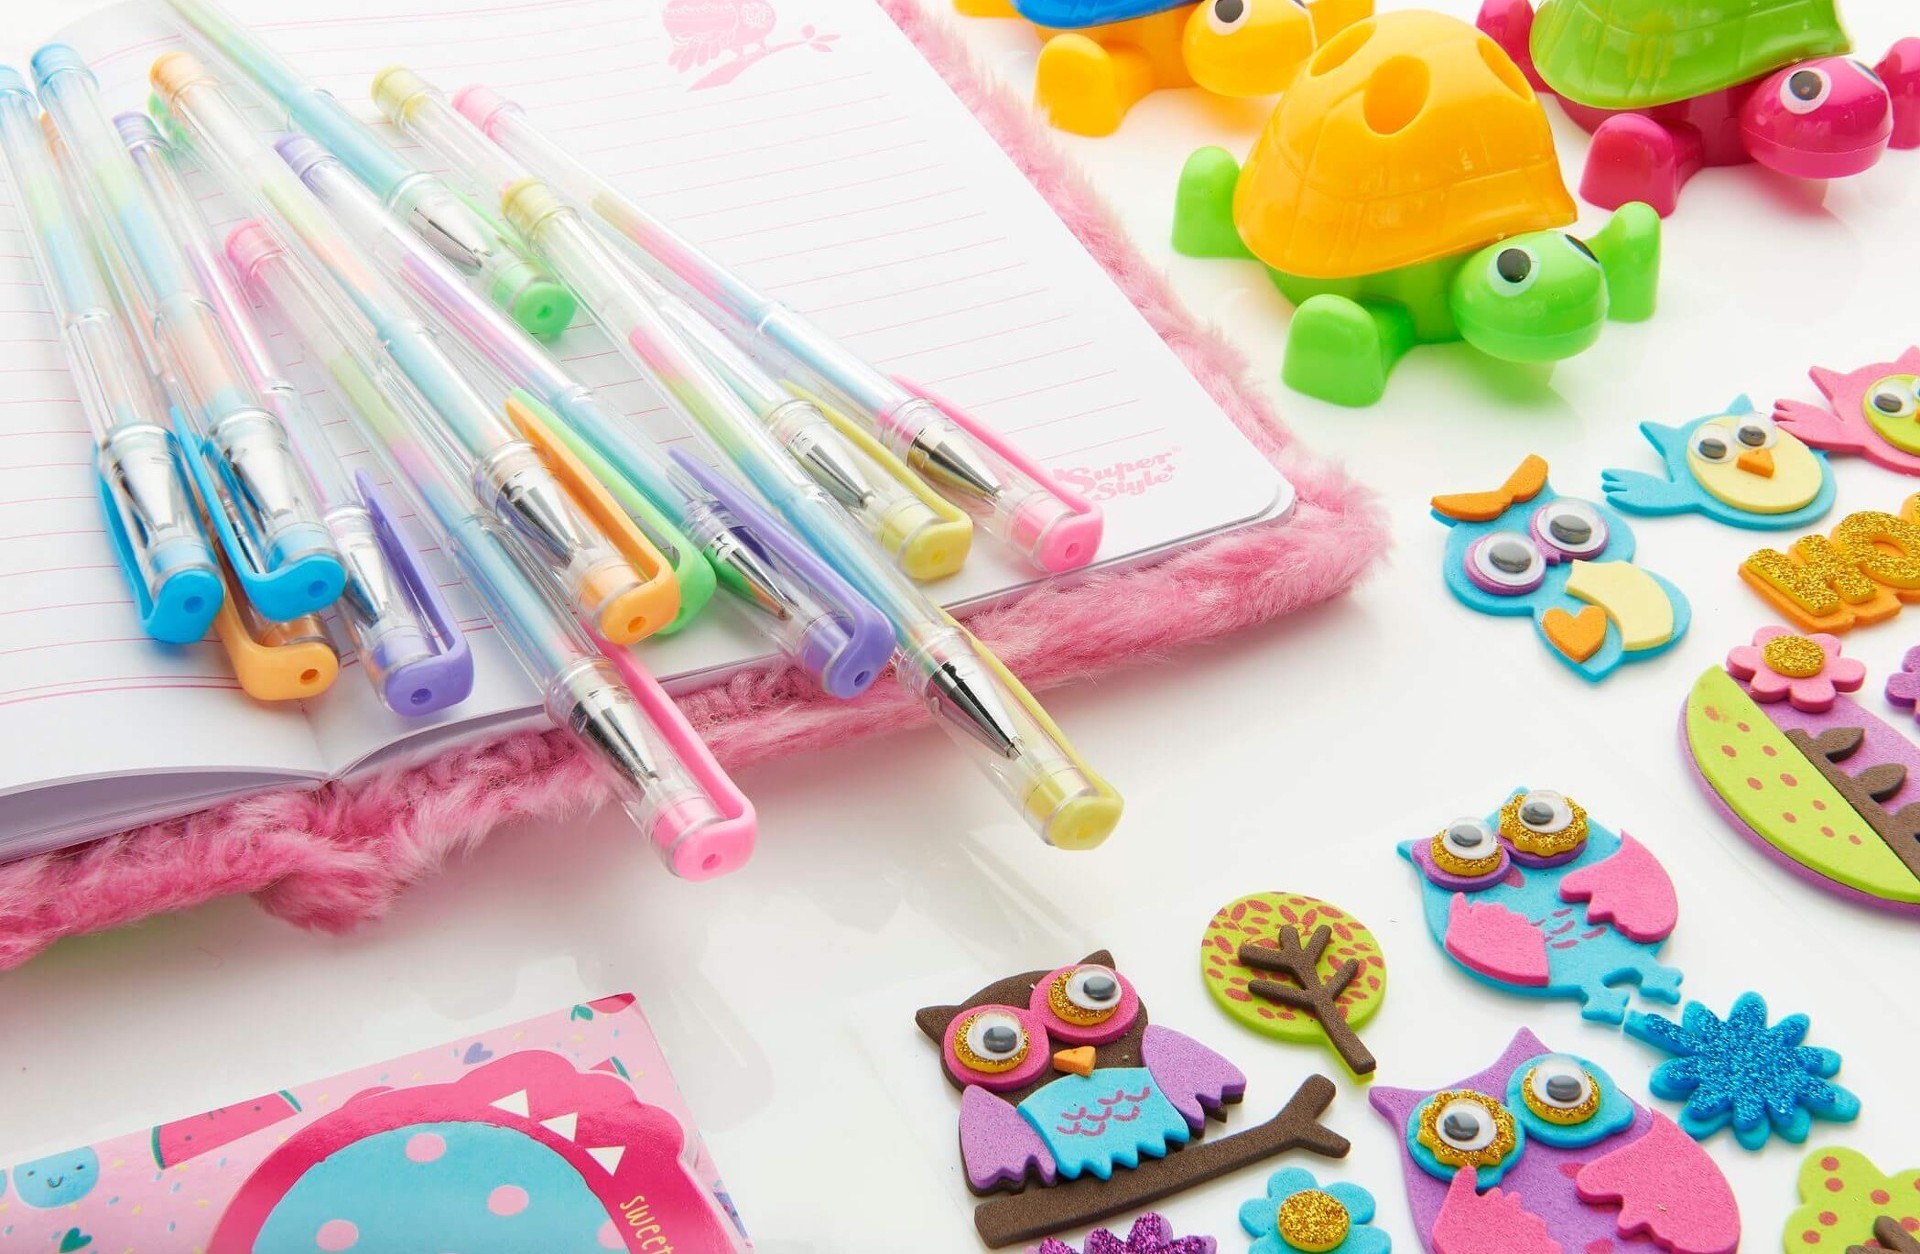 Is a fun range of stationery for kids to enjoy.